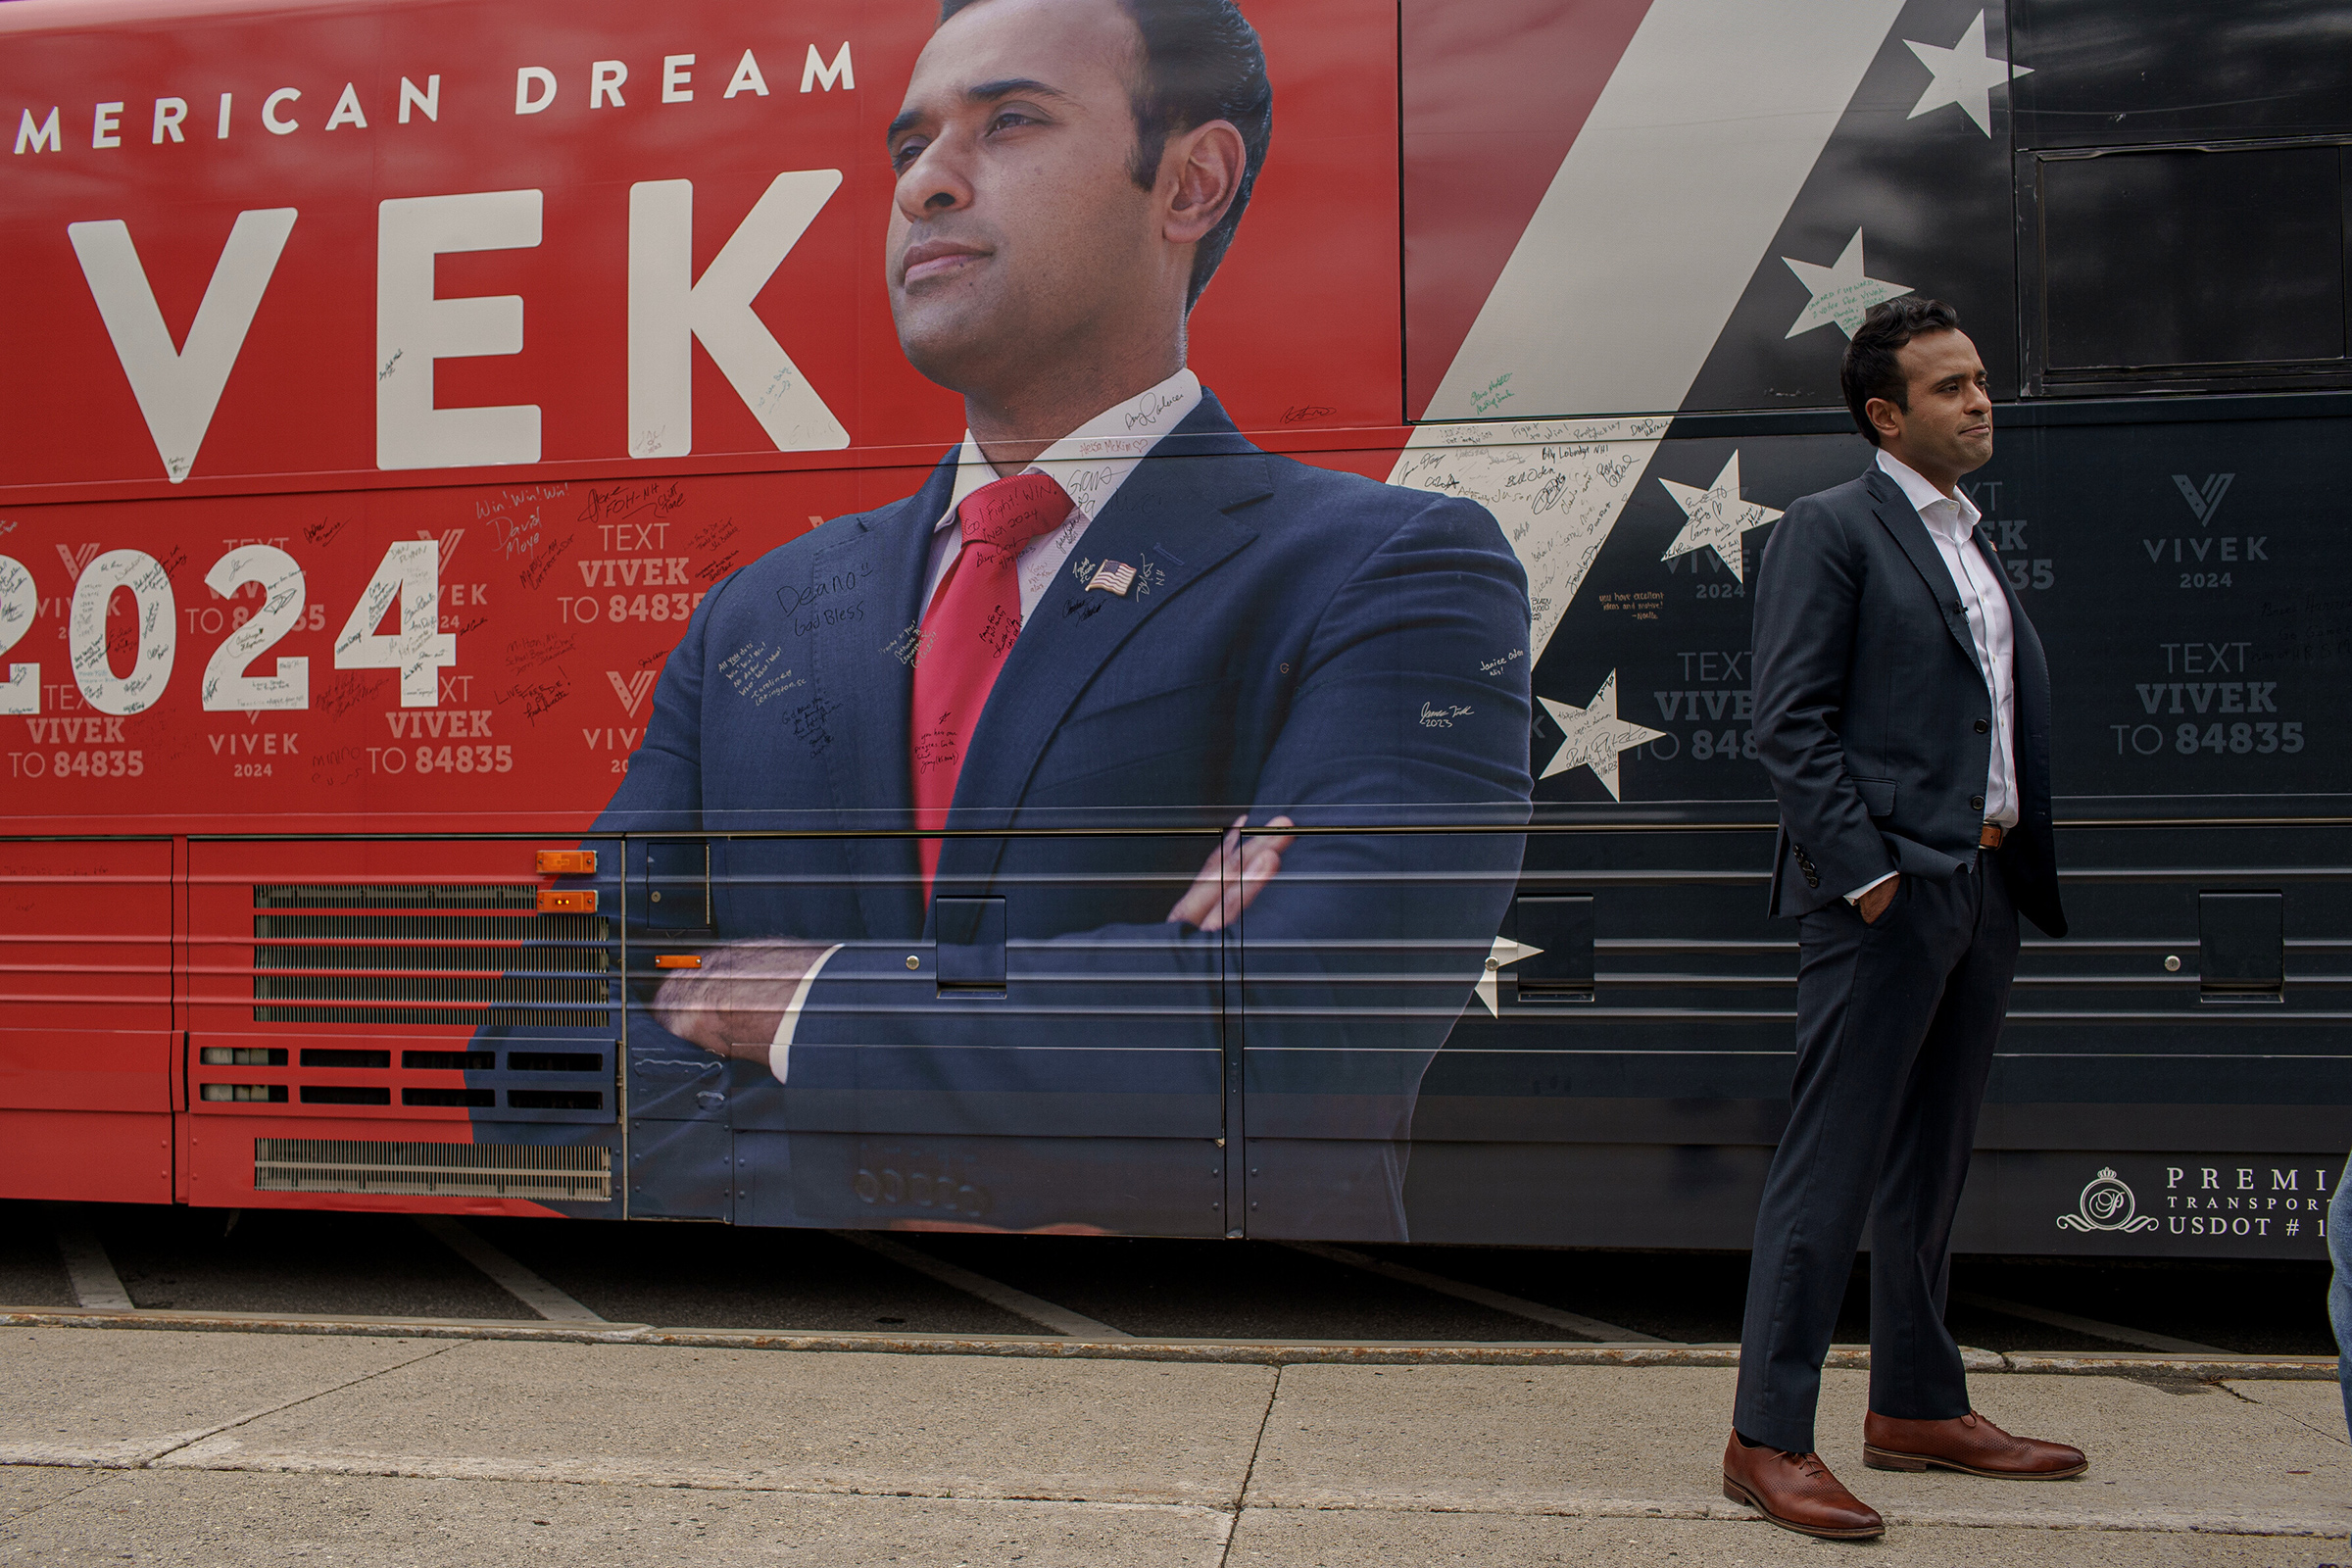 Vivek Ramaswamy, a wealthy 37-year-old entrepreneur, author, and Republican contender for president in 2024, outside his campaign tour bus at the the University of New Hampshire in Durham, N.H., on May 4. (John Tully—The New York Times/Redux)